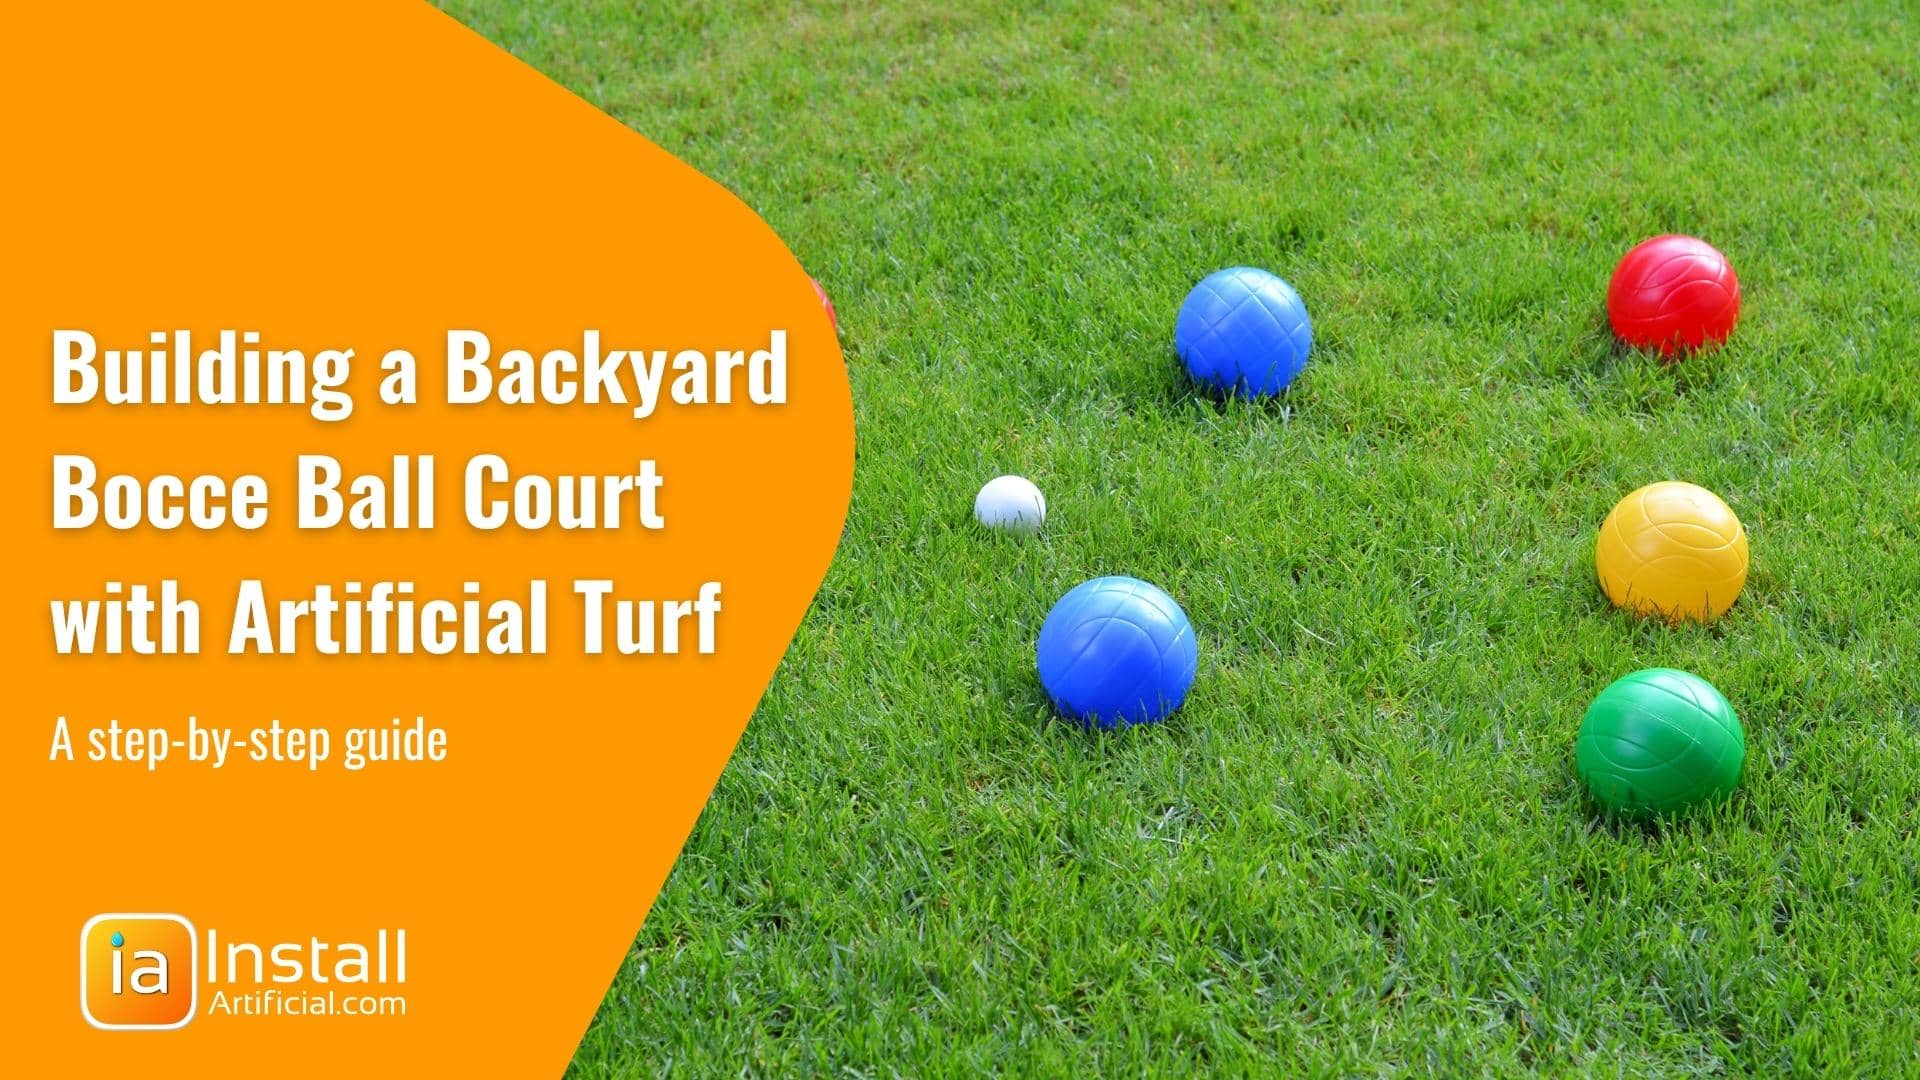 Building a Backyard Bocce Ball Court with Artificial Turf